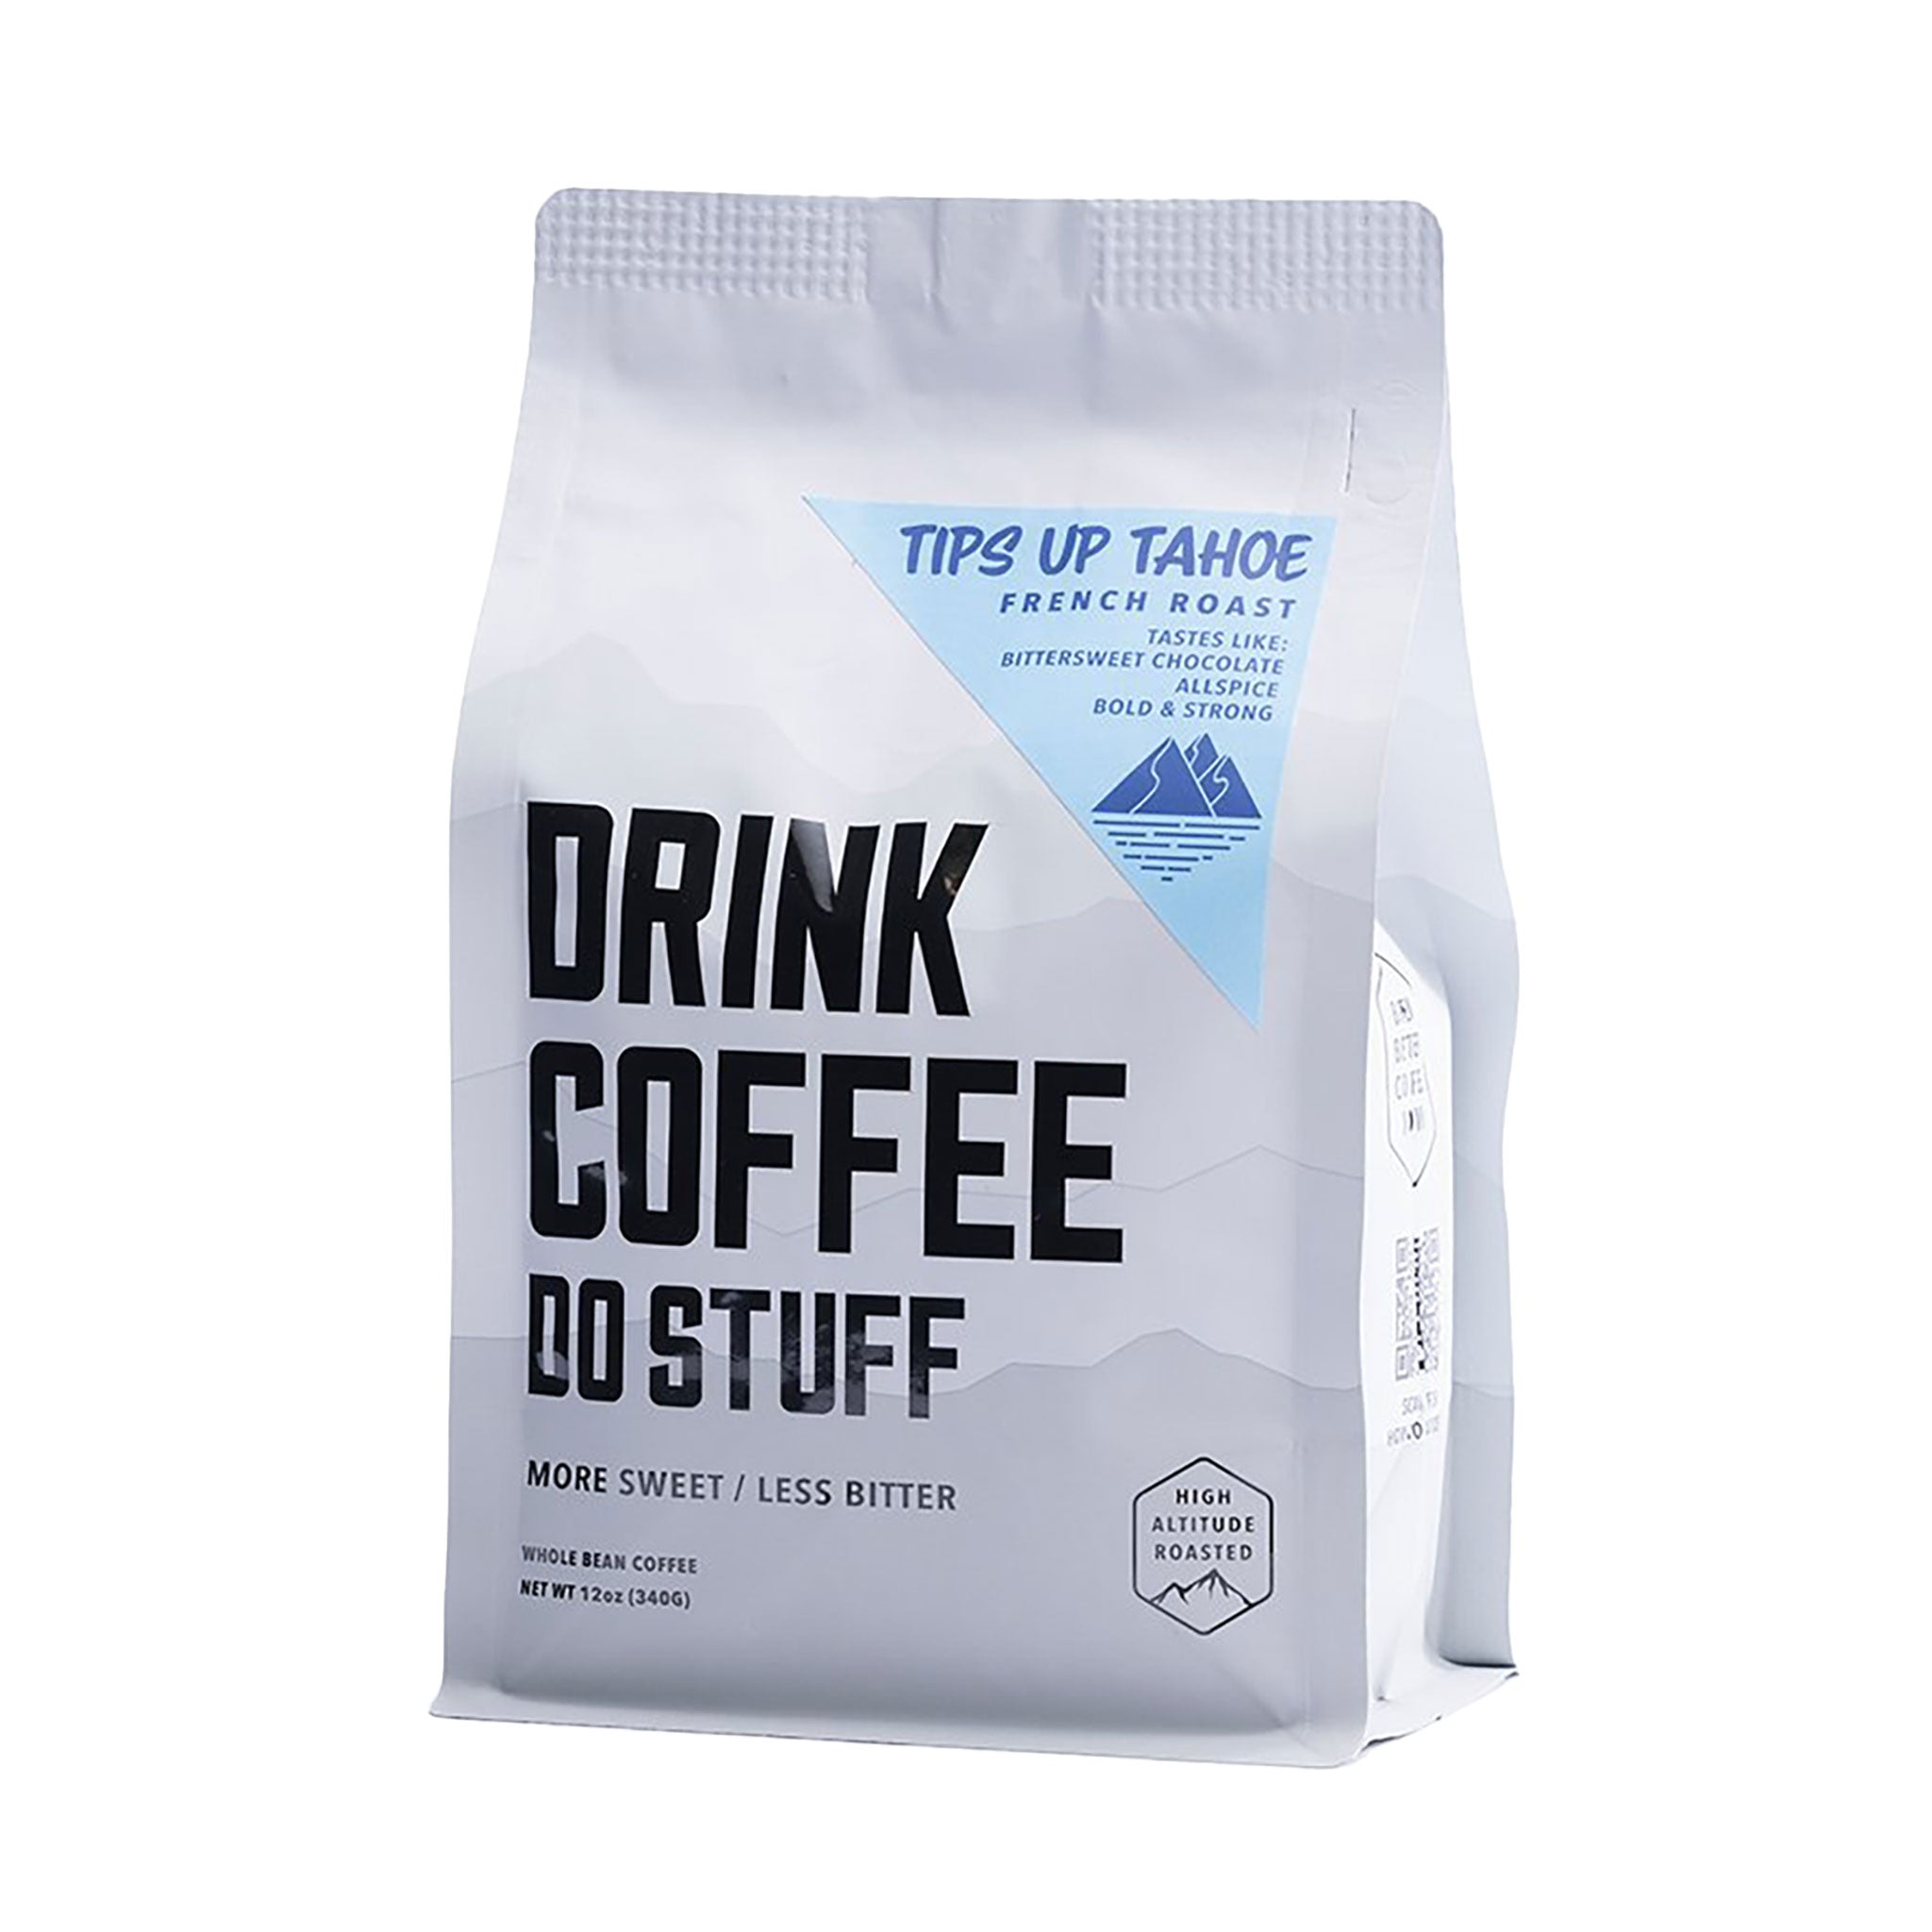 Tips Up Tahoe French Roast (Drink Coffee Do Stuff)